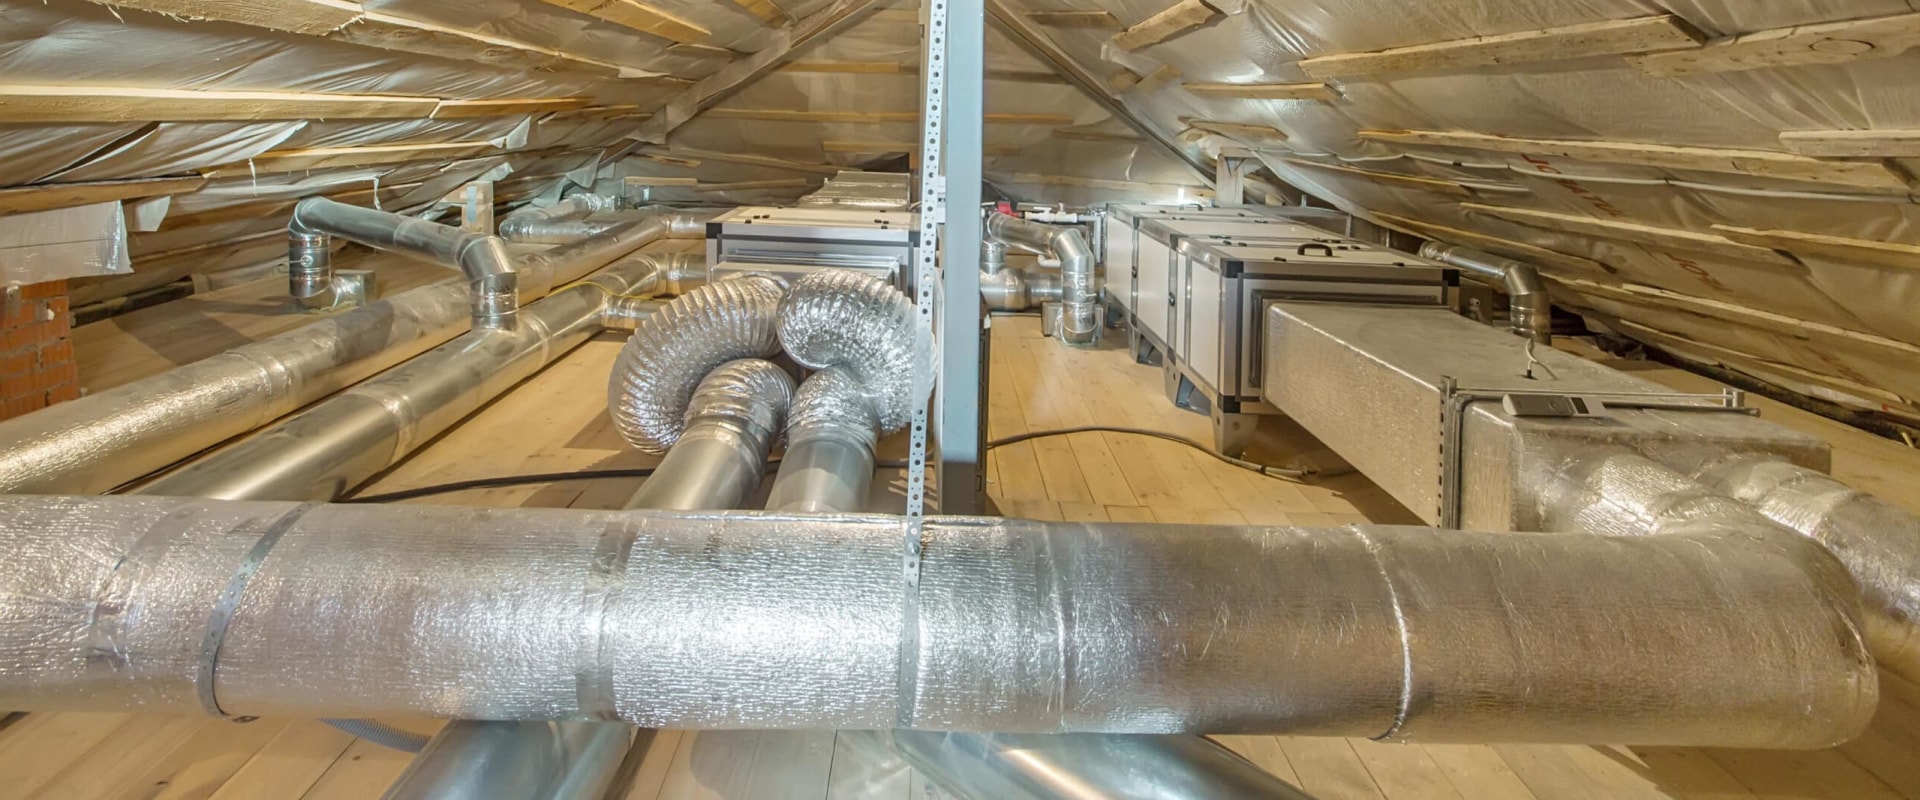 The Benefits of Air-Sealing and Duct-Sealing for Home Efficiency